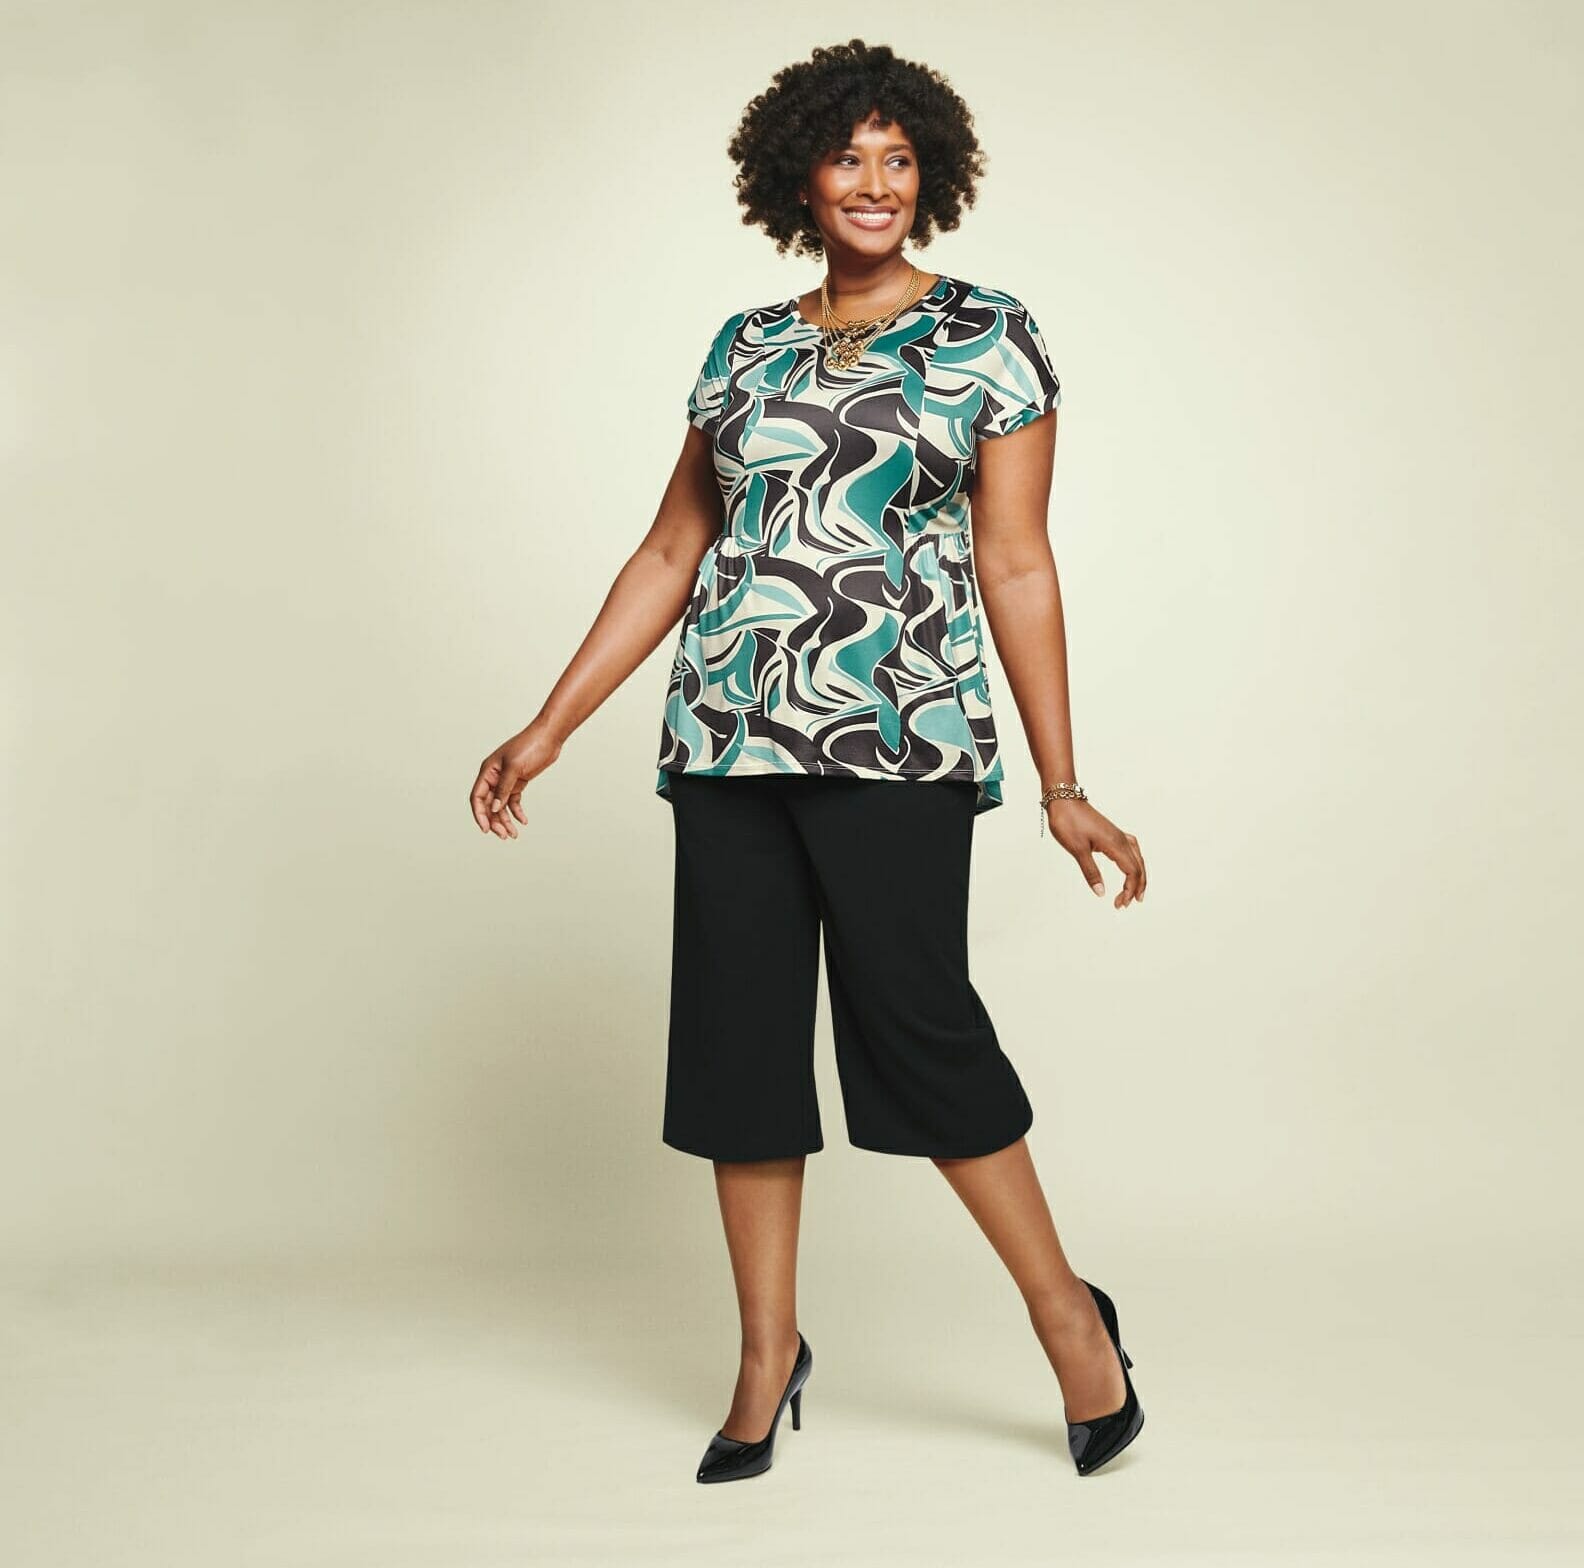 plus size model wearing a blue printed shirt with black capris.